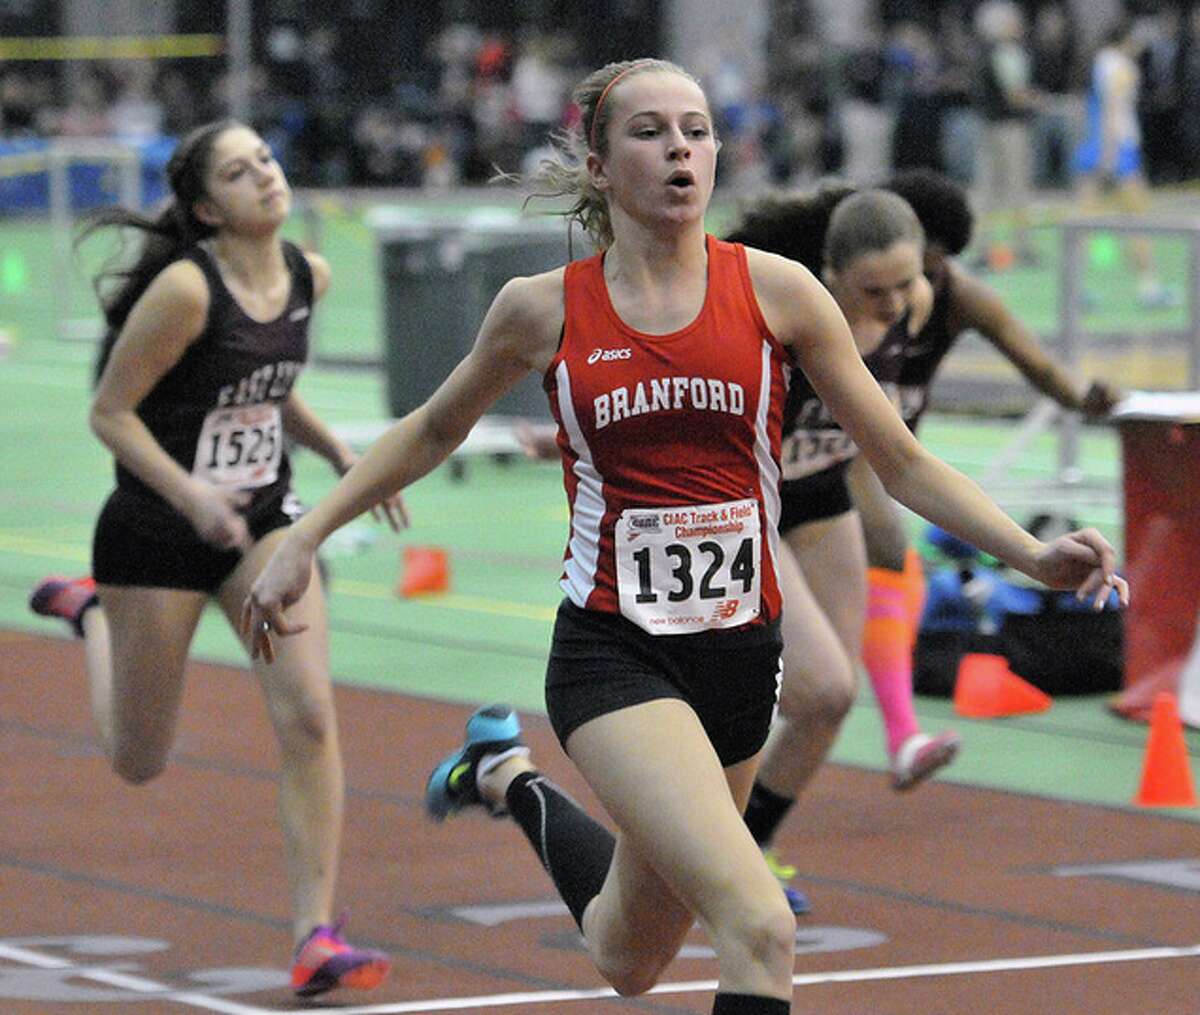 Branford’s Anna Atkinson crosses the finish to win the 55 hurdles final at the Class L State Track Championships.